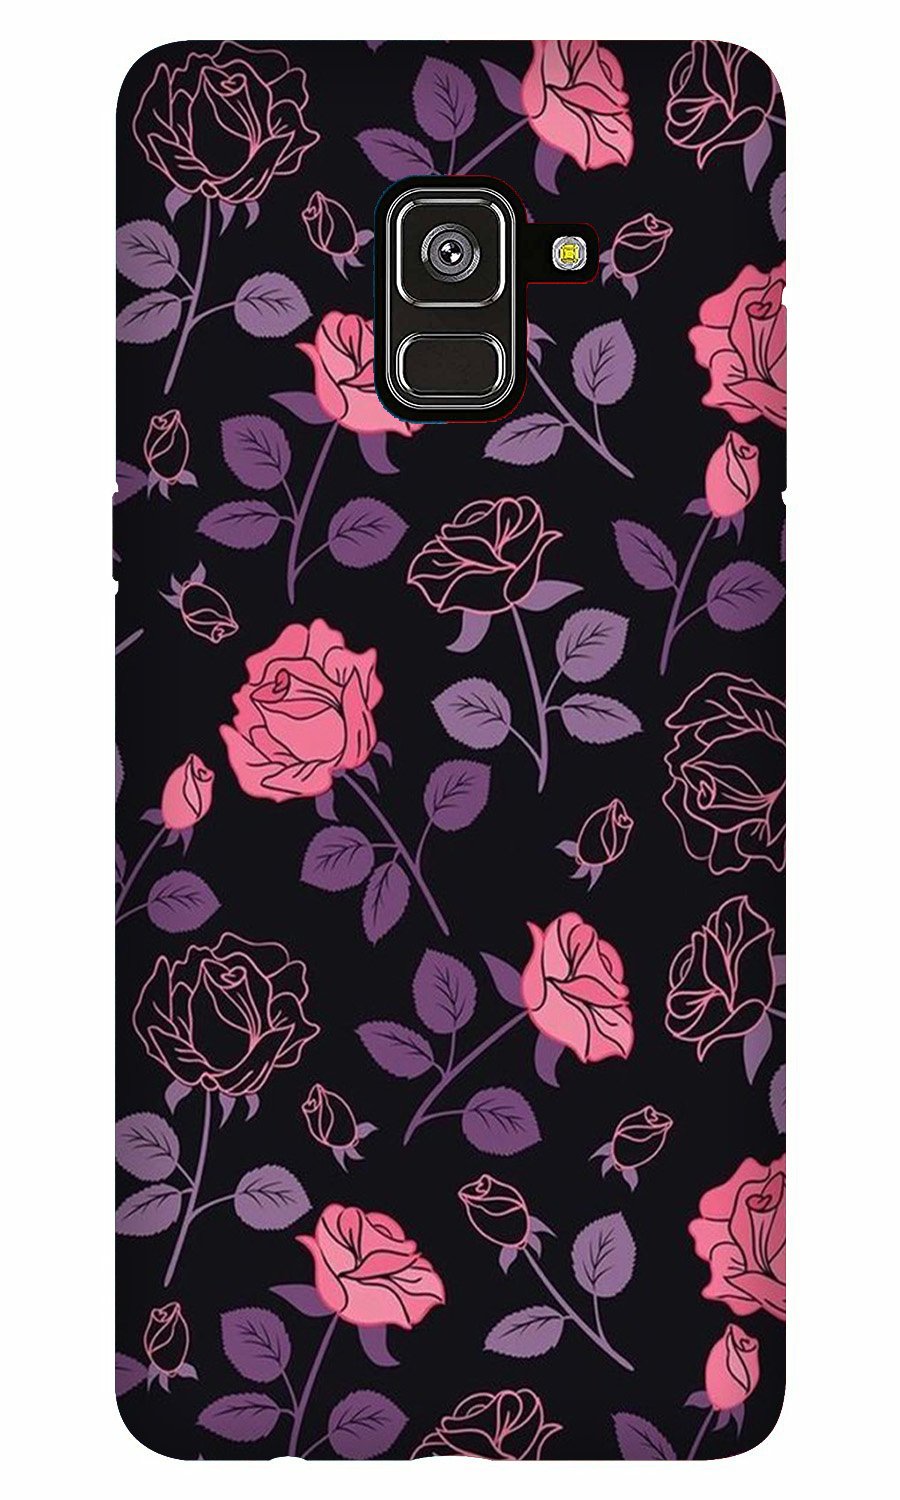 Rose Black Background Case for Galaxy A8 Plus